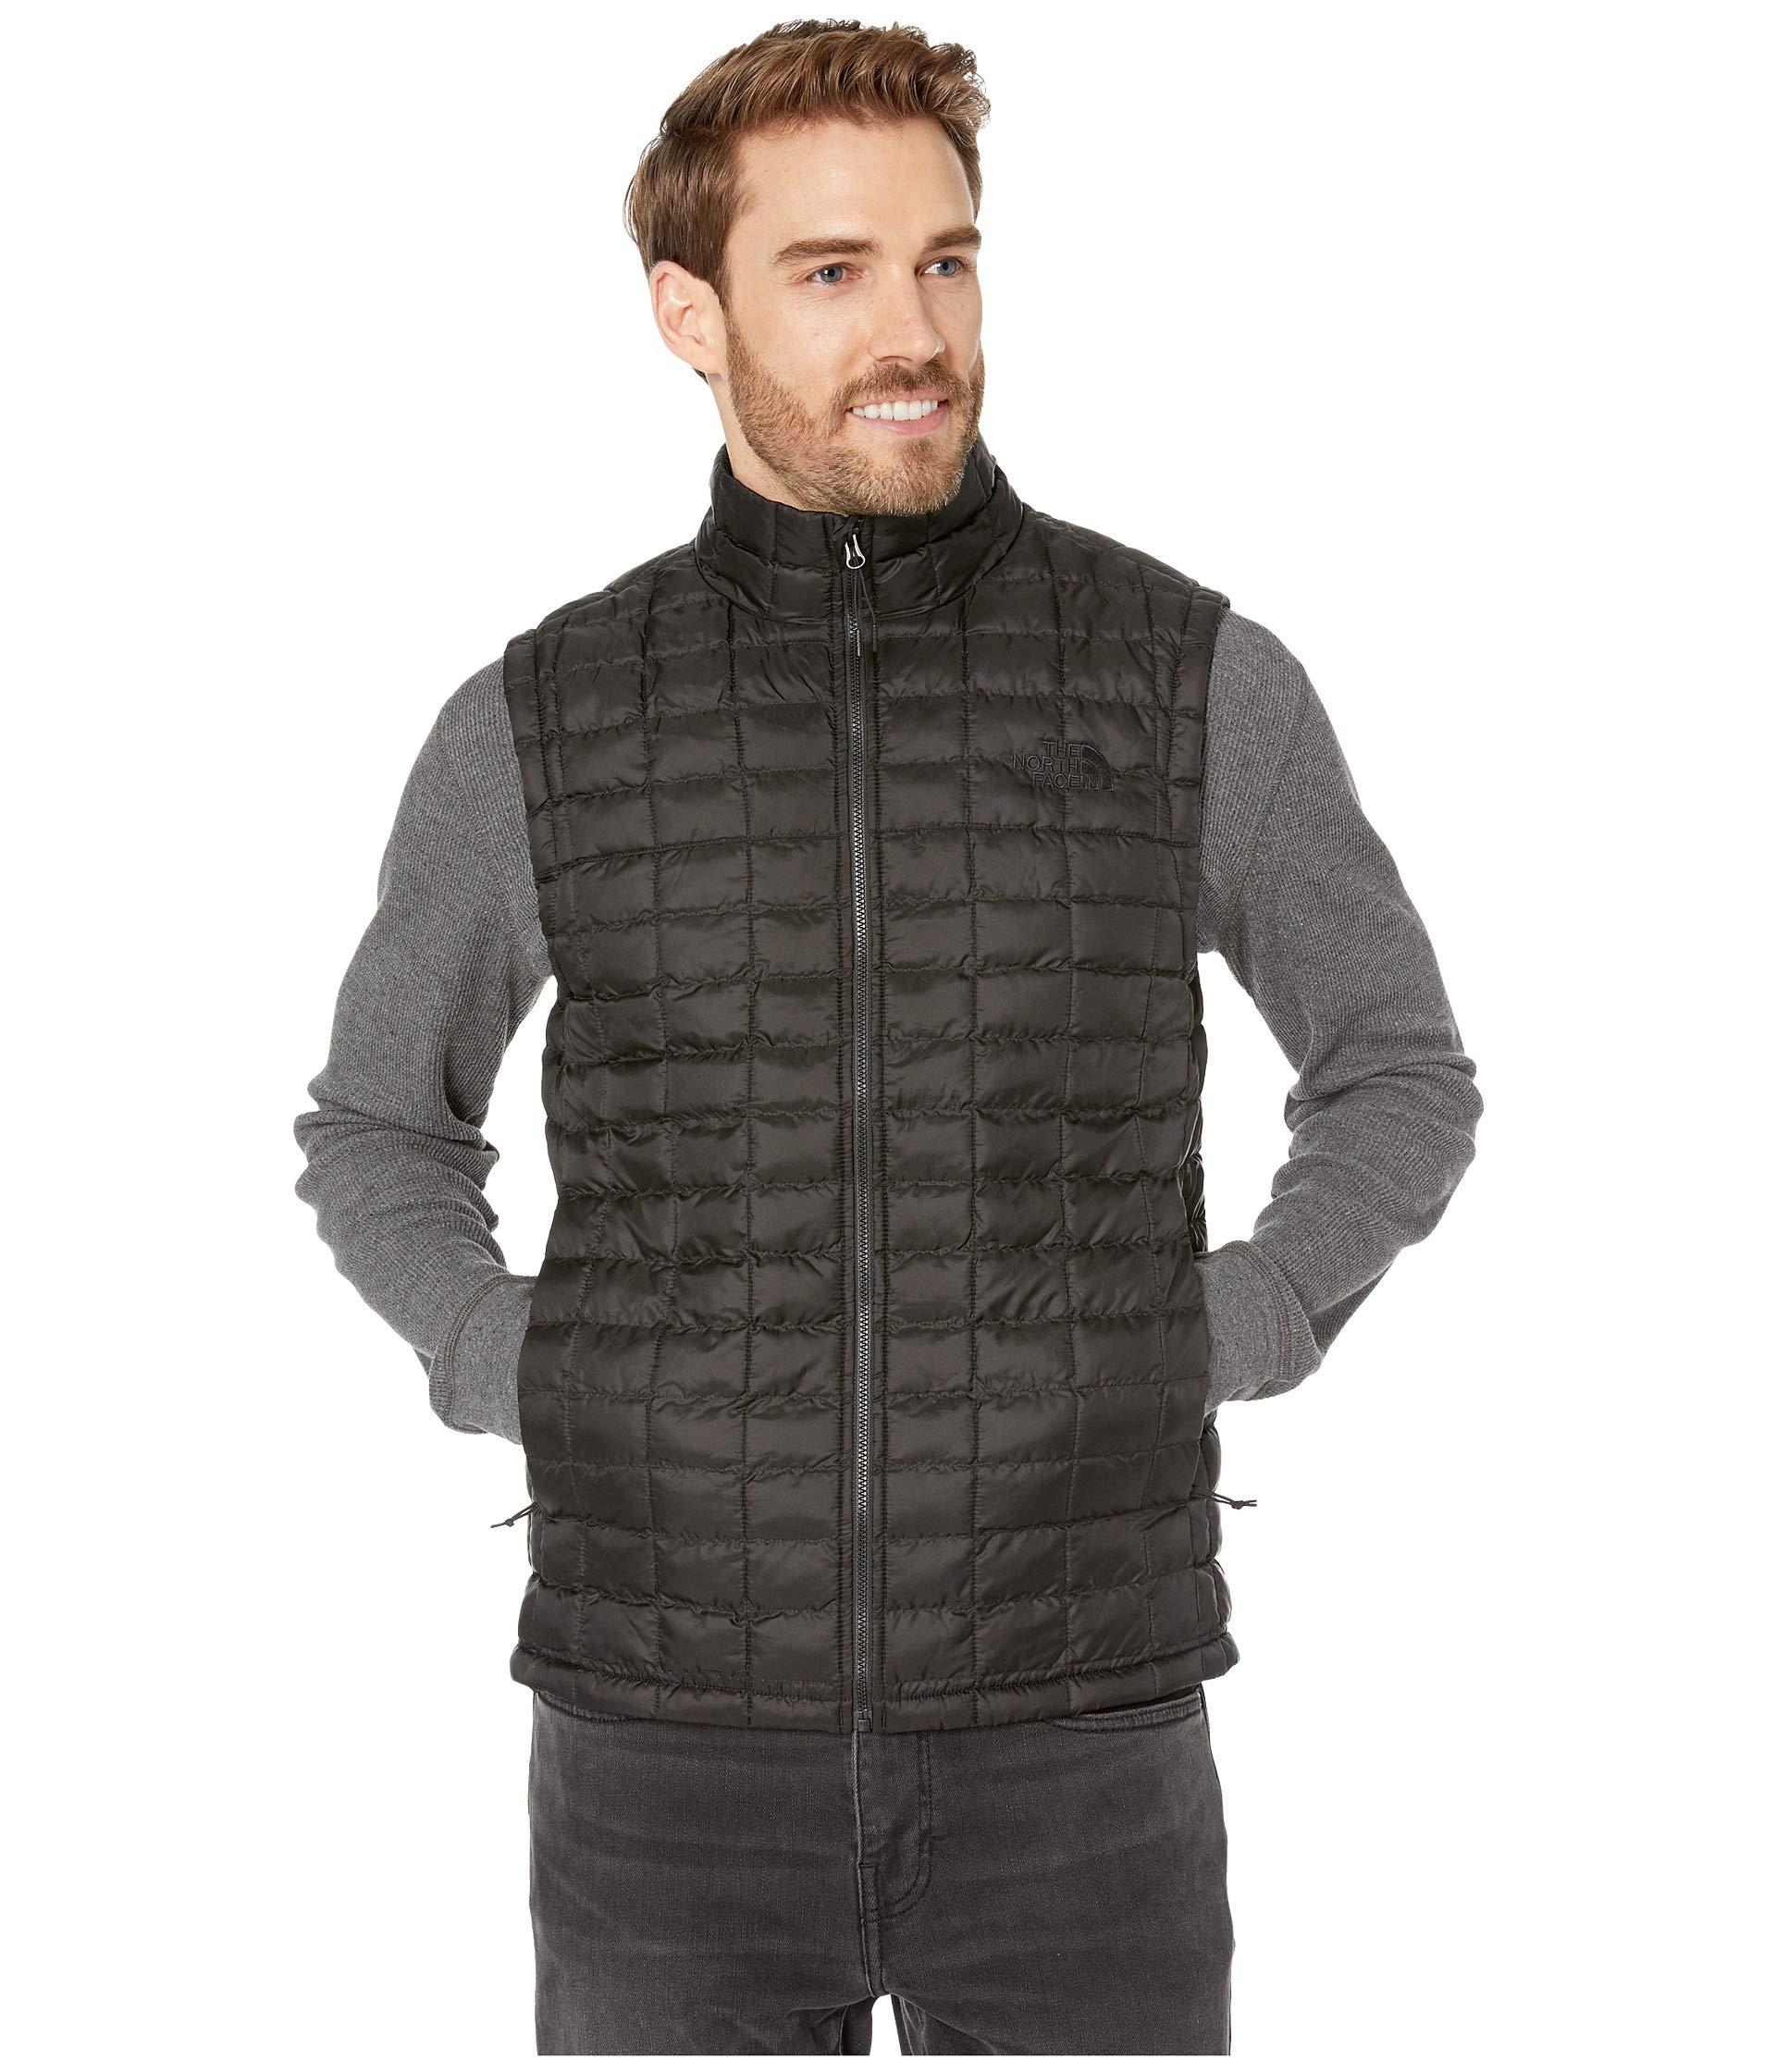 The North Face Synthetic Thermoball Eco Vest in Black for Men - Lyst